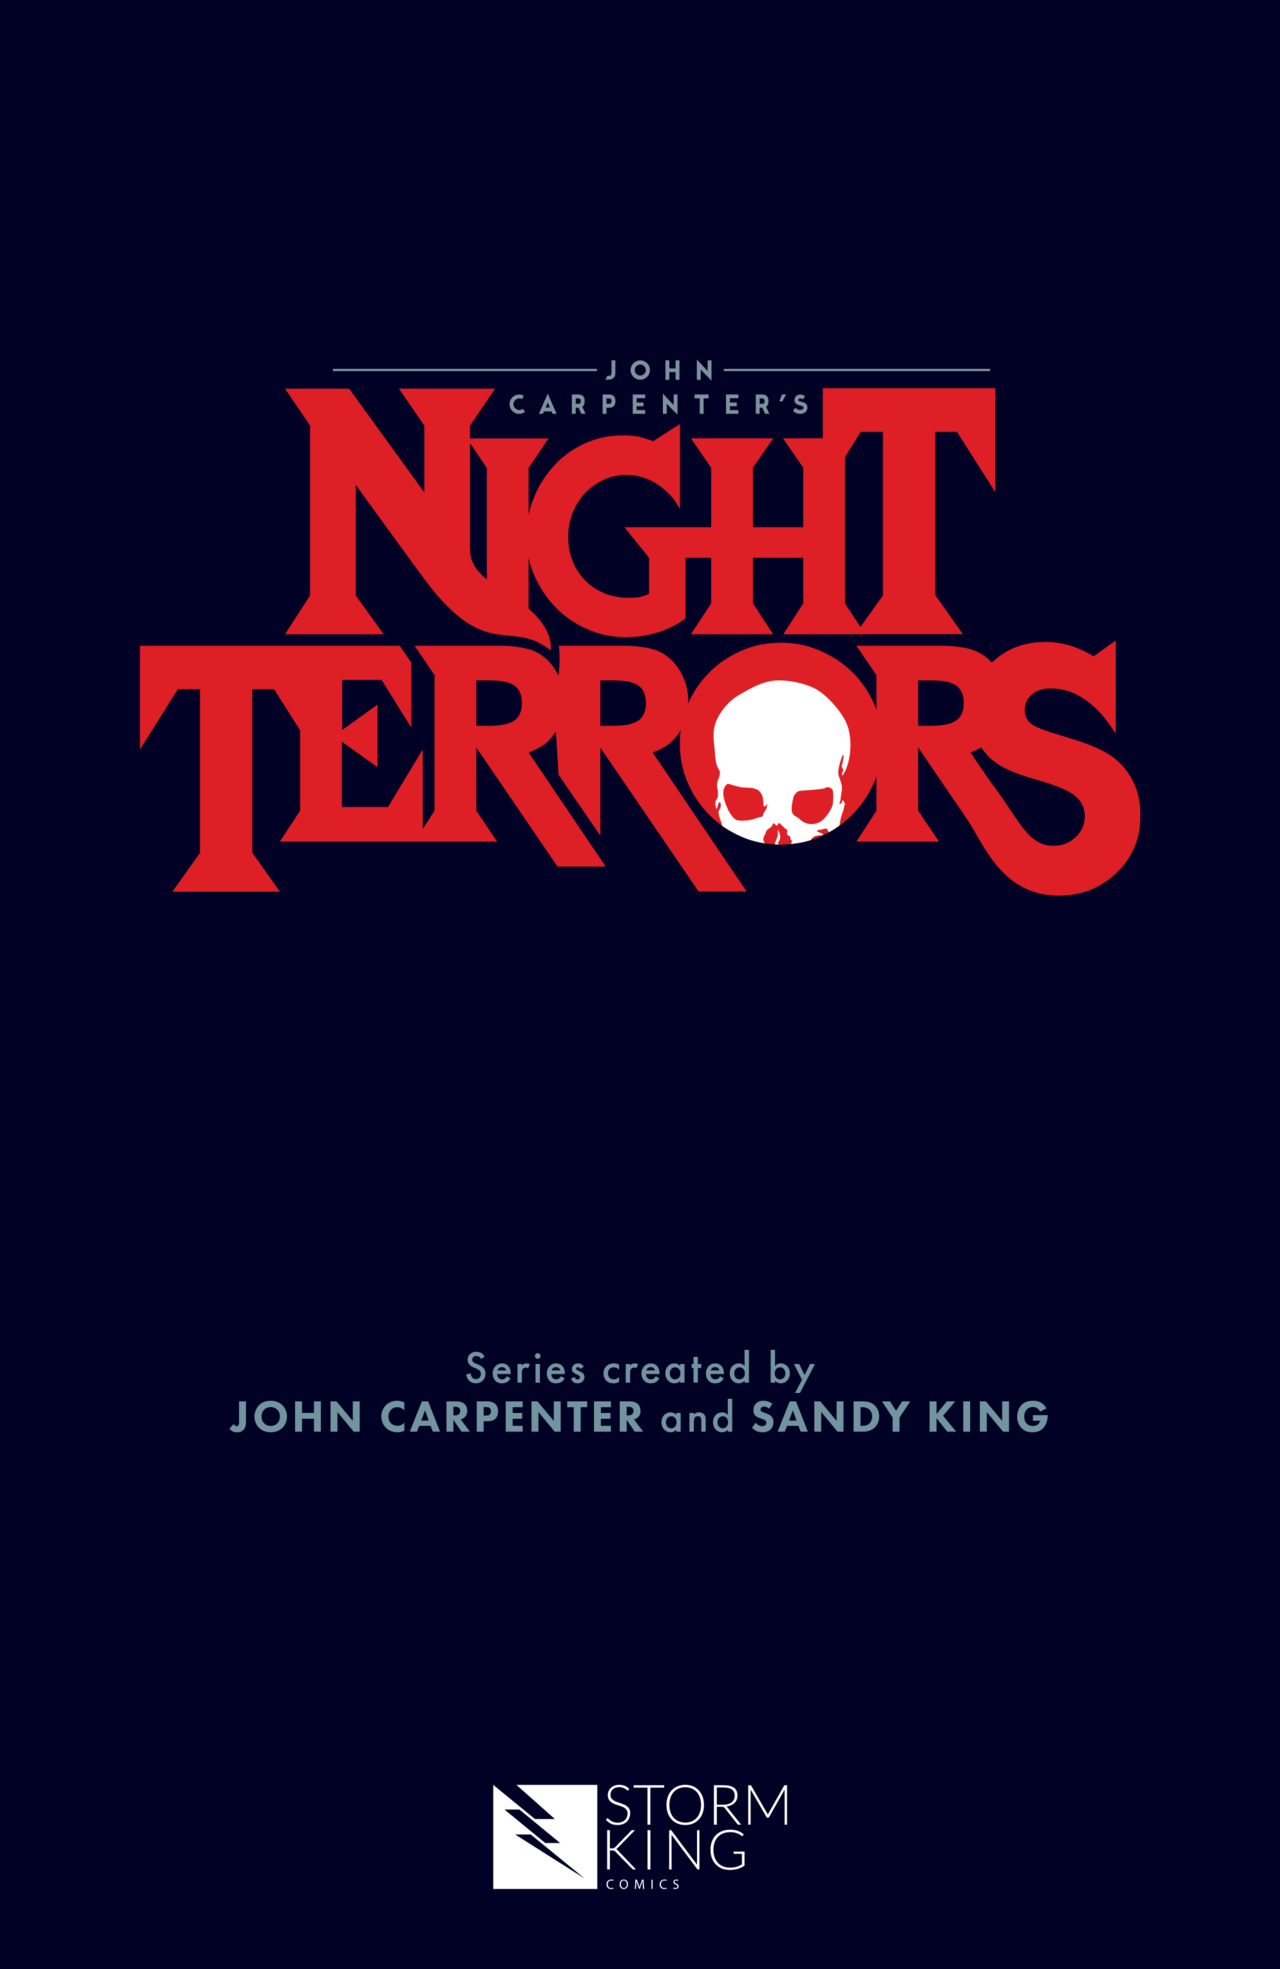 Read online John Carpenter's Night Terrors comic -  Issue # Sour Candy - 3